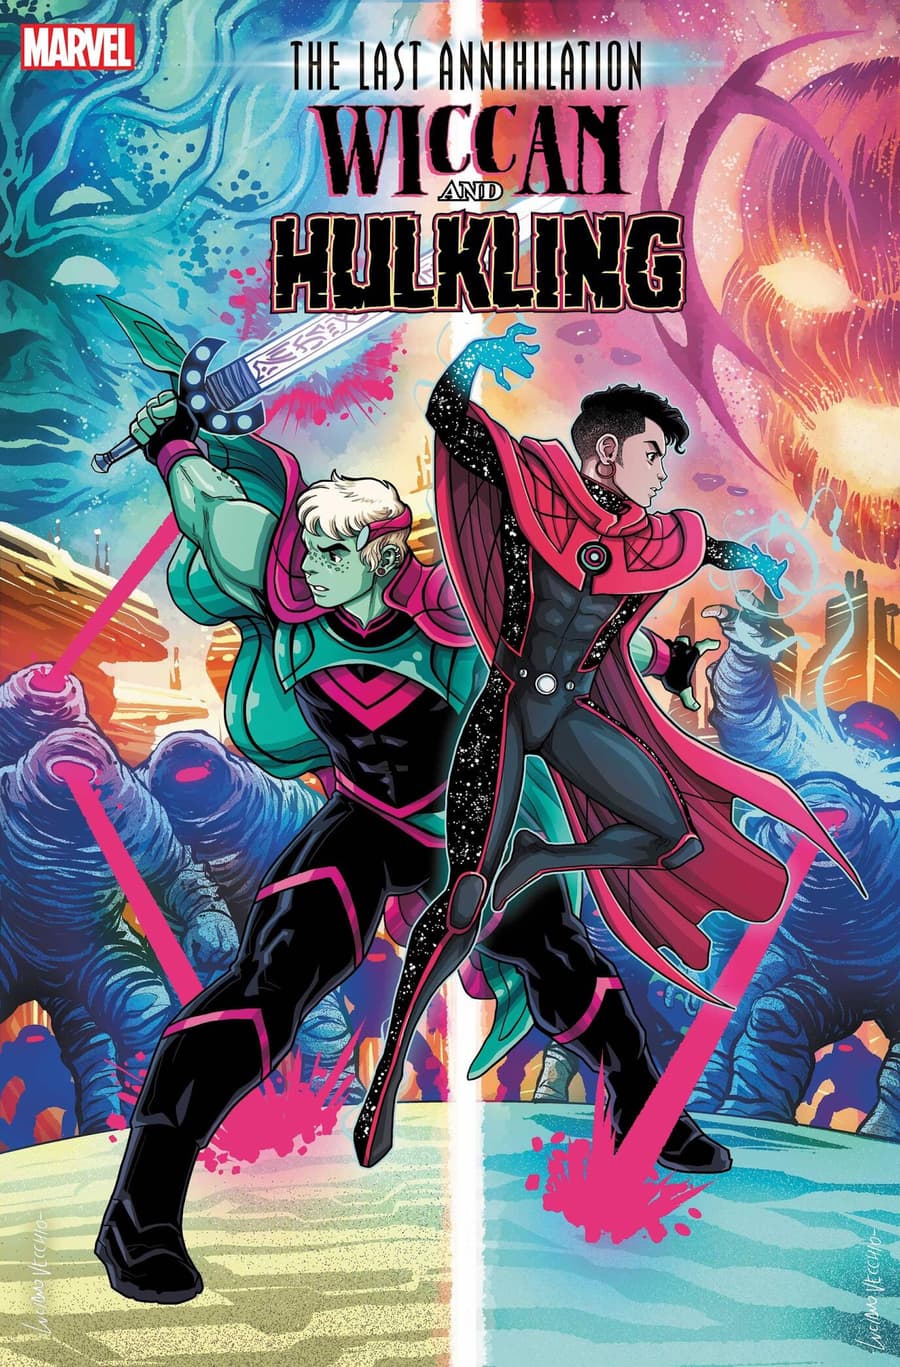 THE LAST ANNIHILATION: WICCAN & HULKLING #1